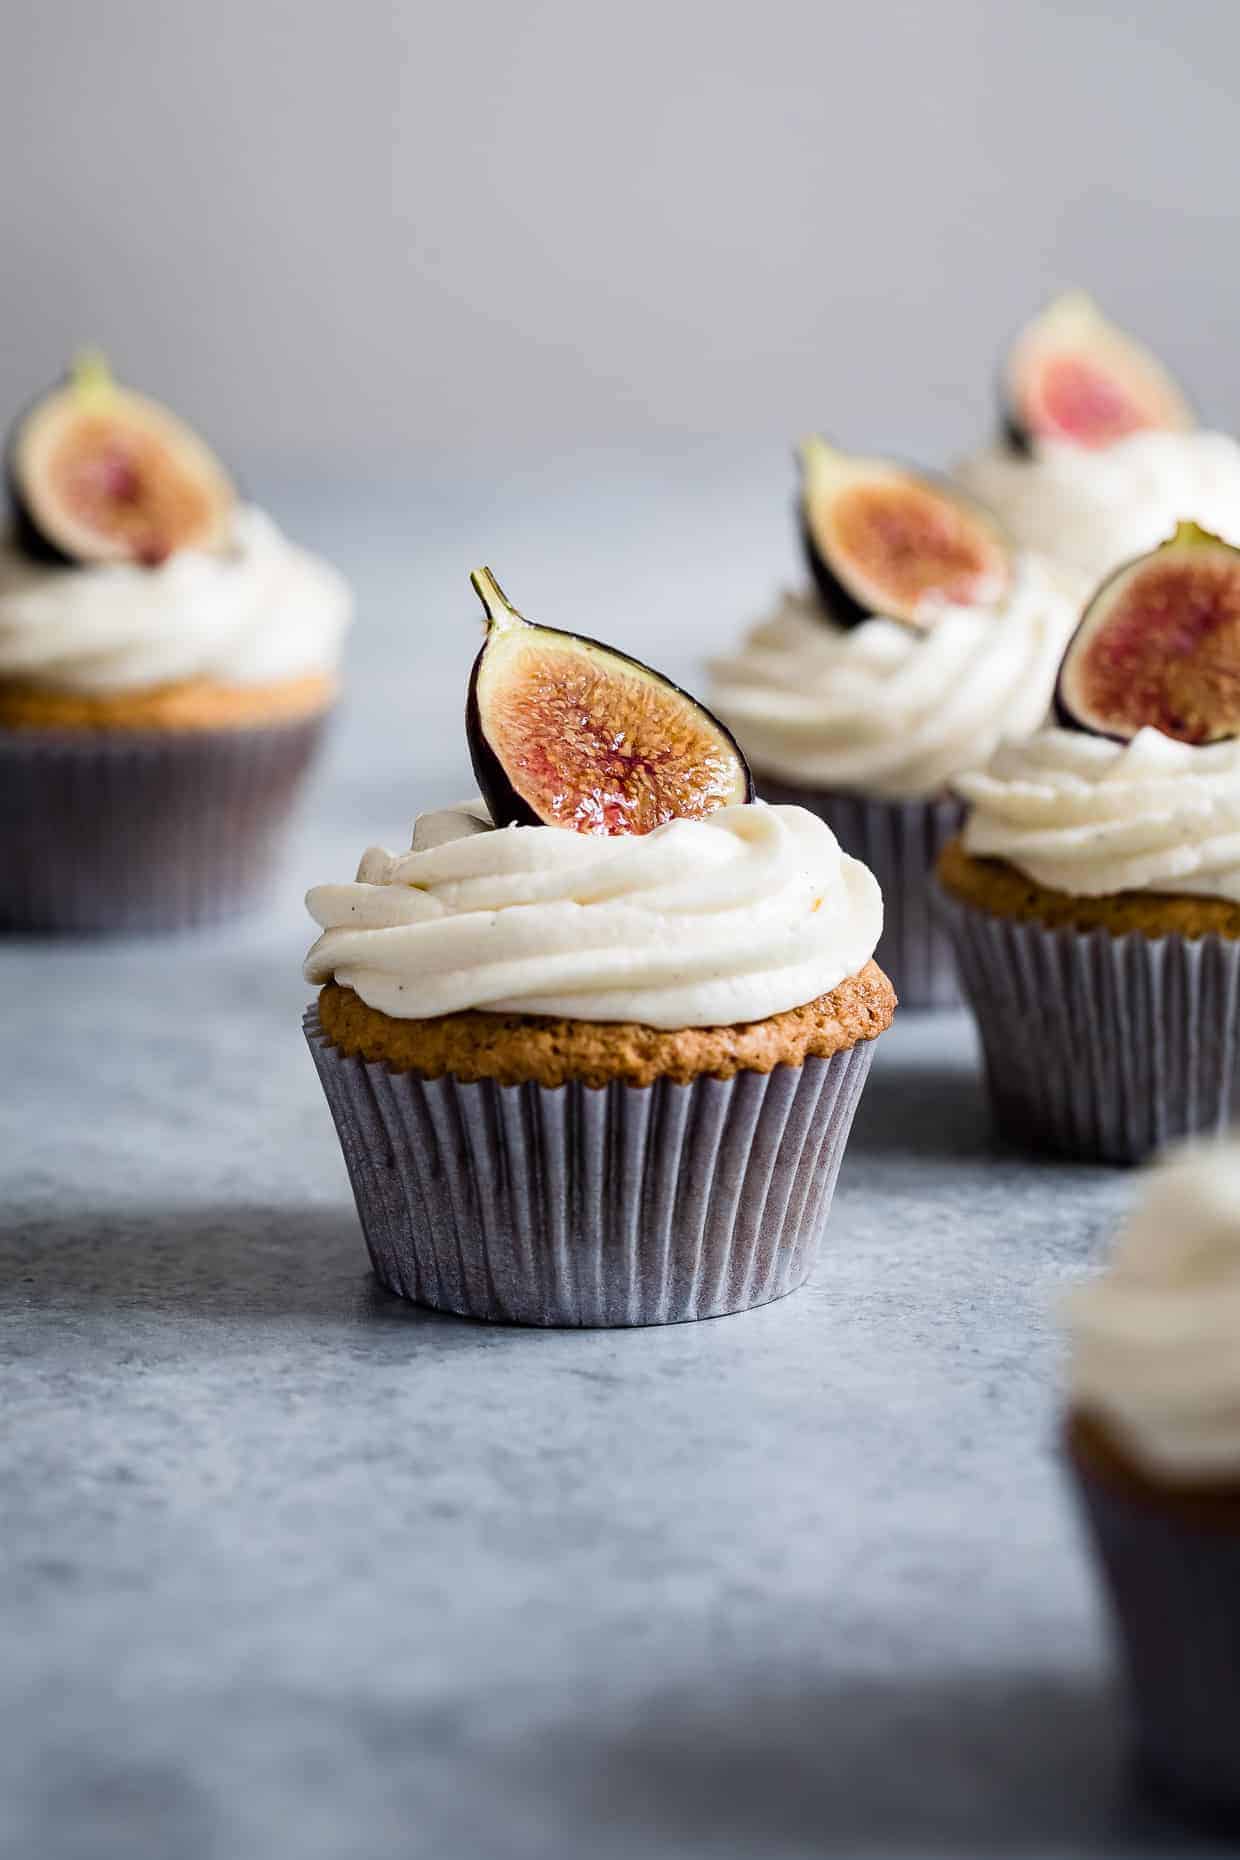 Gluten-Free Vanilla Cupcakes with Goat Cheese Frosting & Brûléed Figs